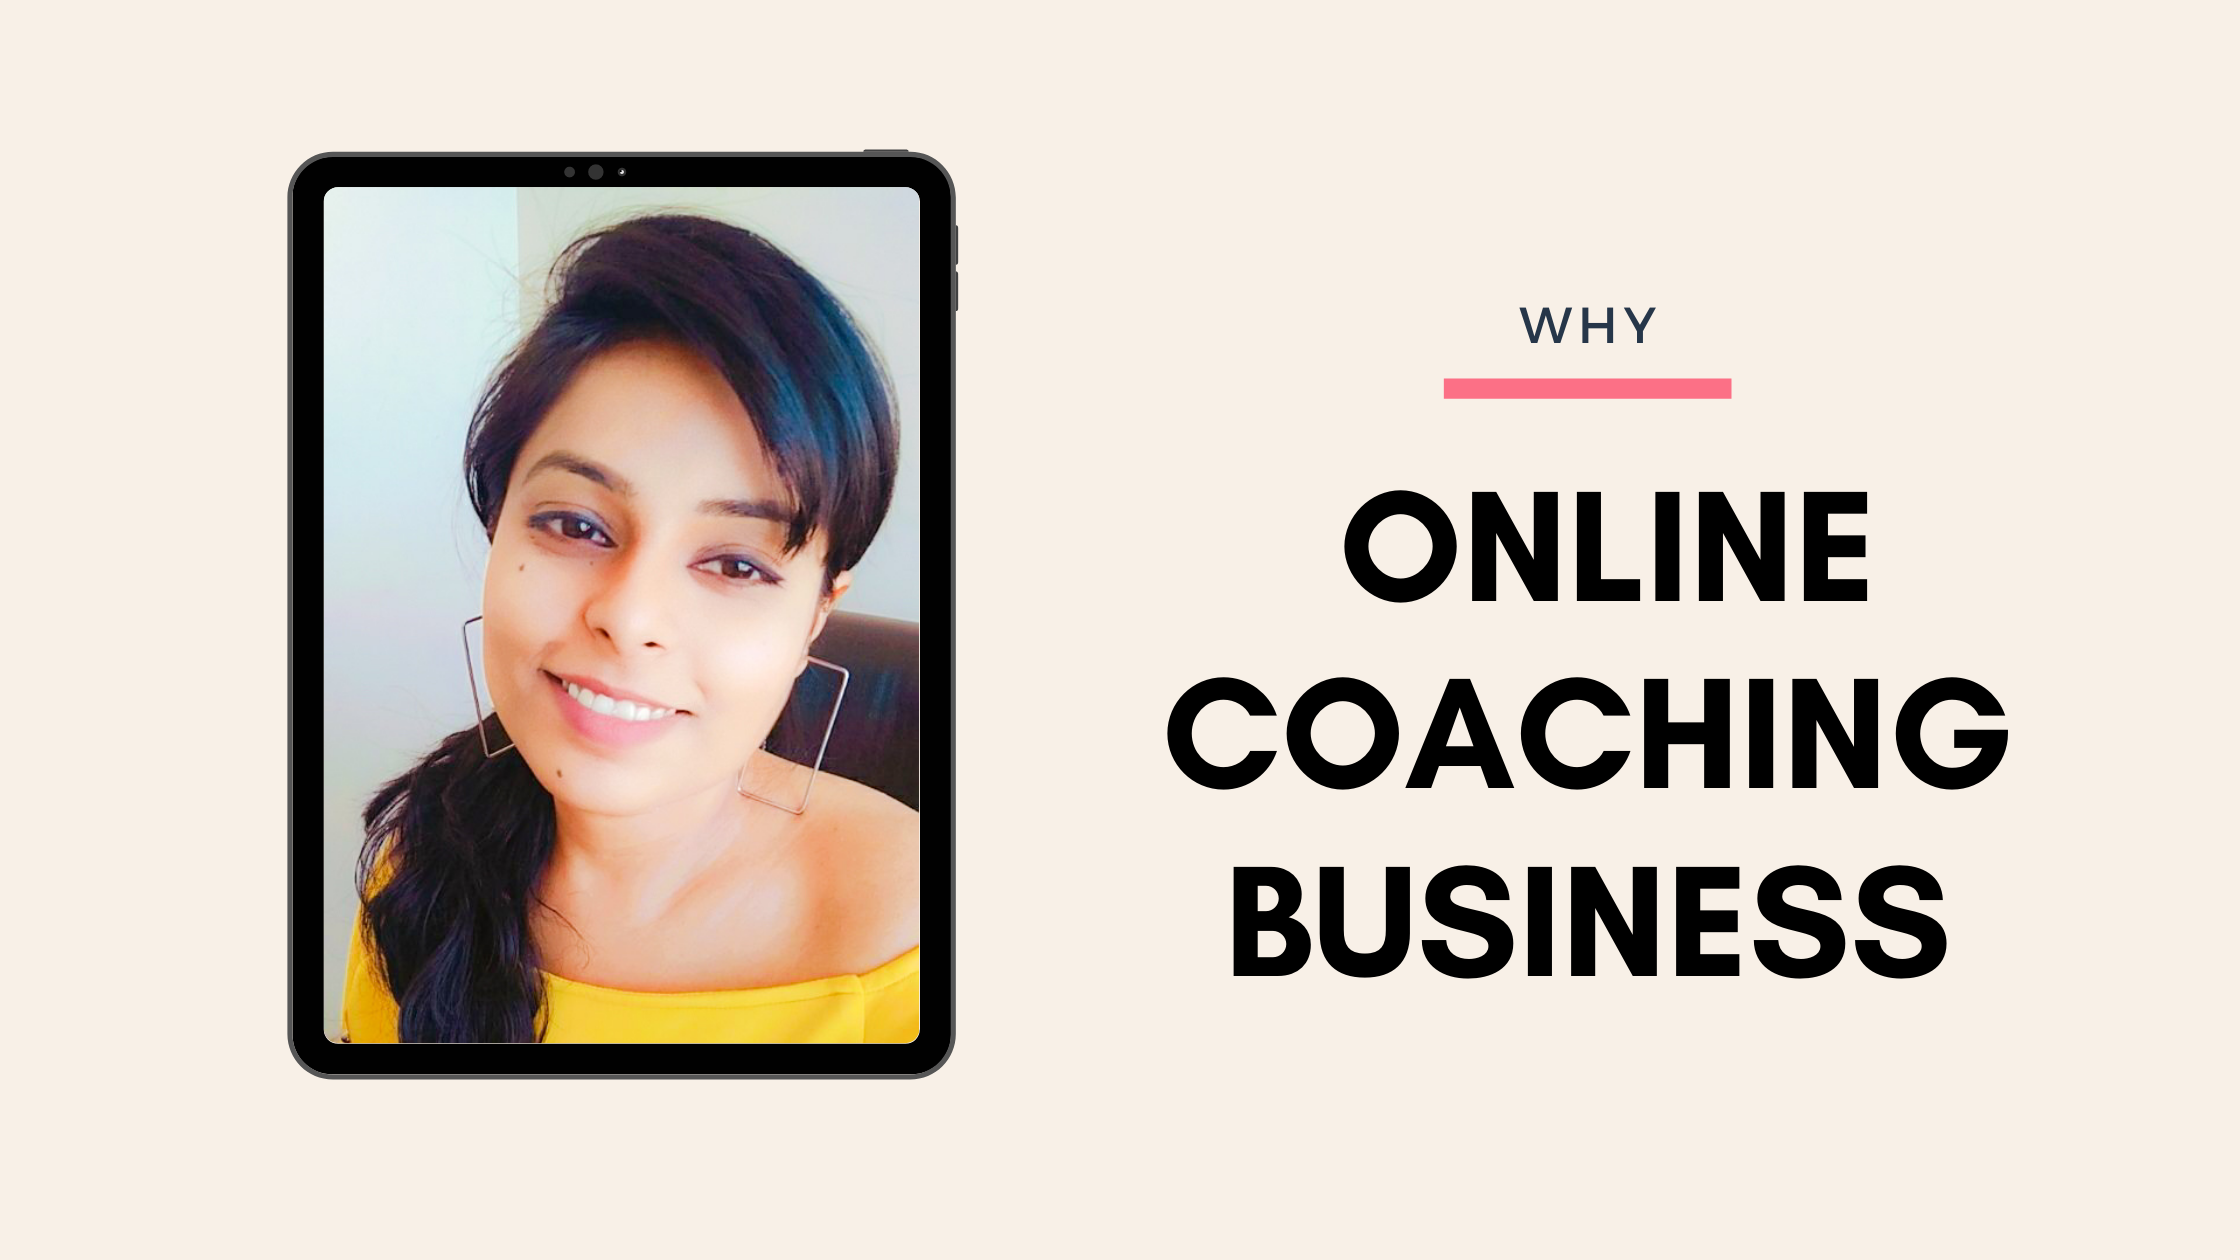 Why online coaching business